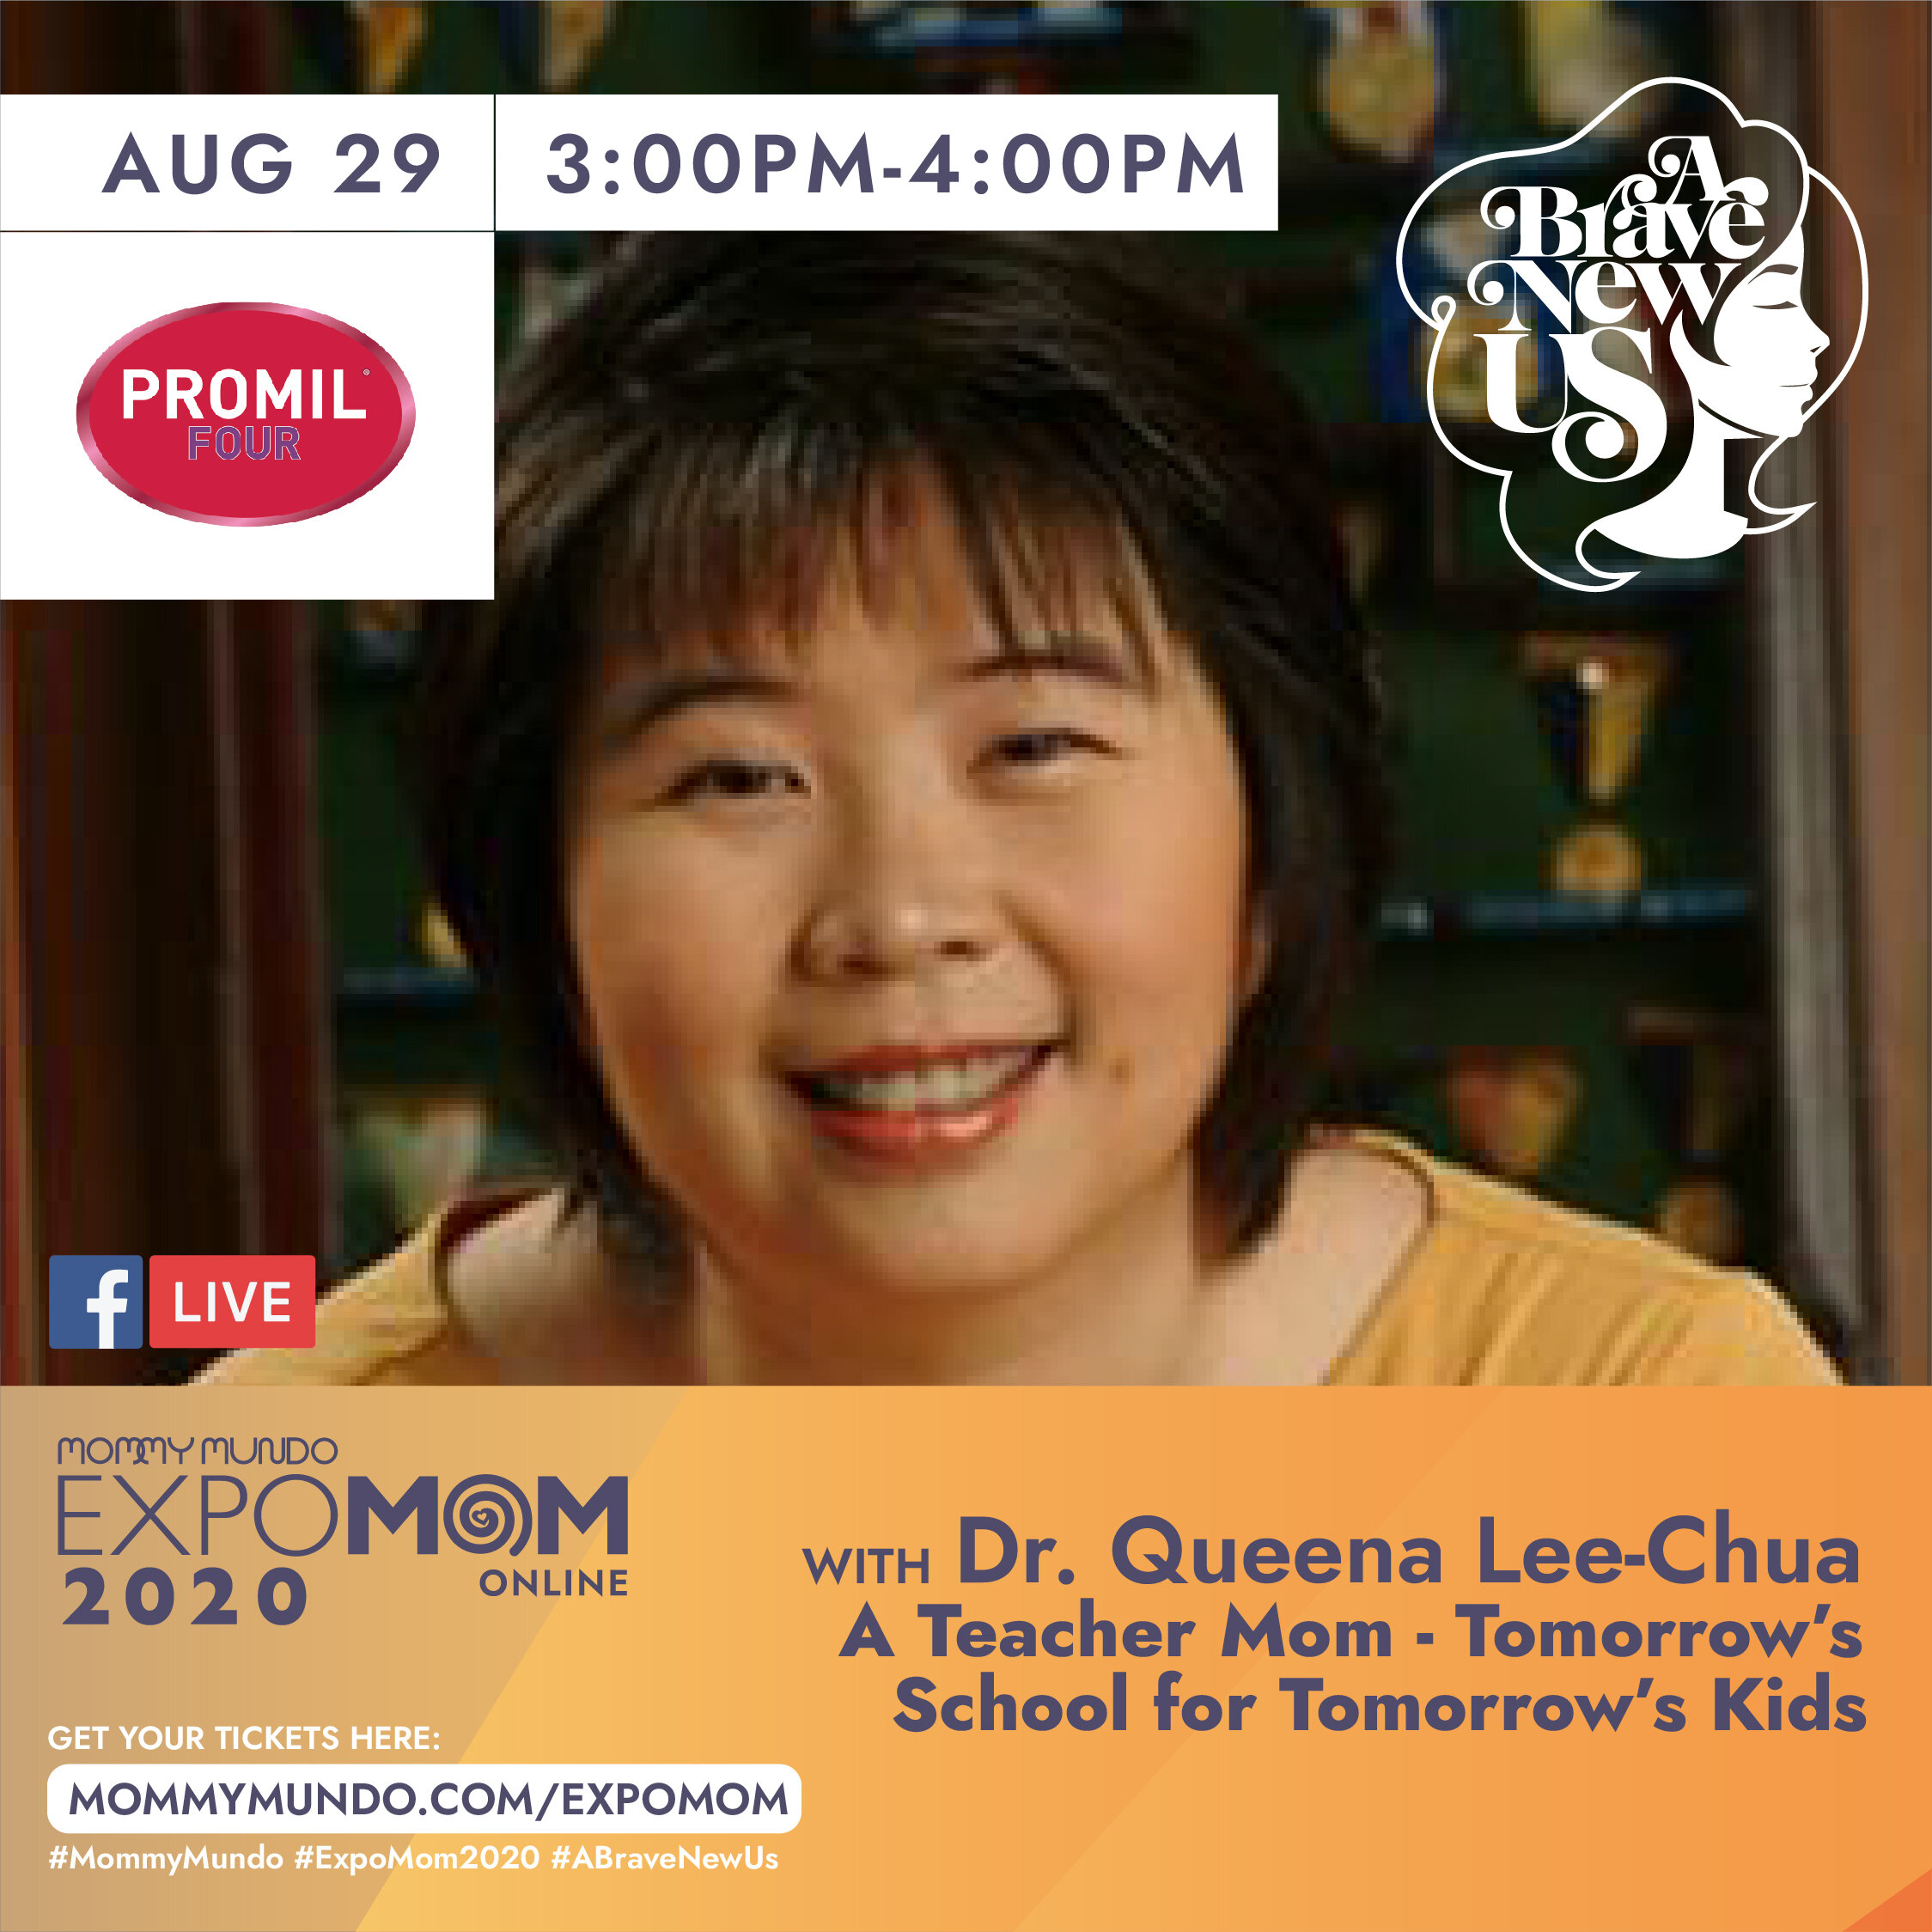  A licensed psychologist, prolific writer and author, and rockstar teacher of Ateneo de Manila University, Dr. Queena is also a DepED and DOST consultant. 